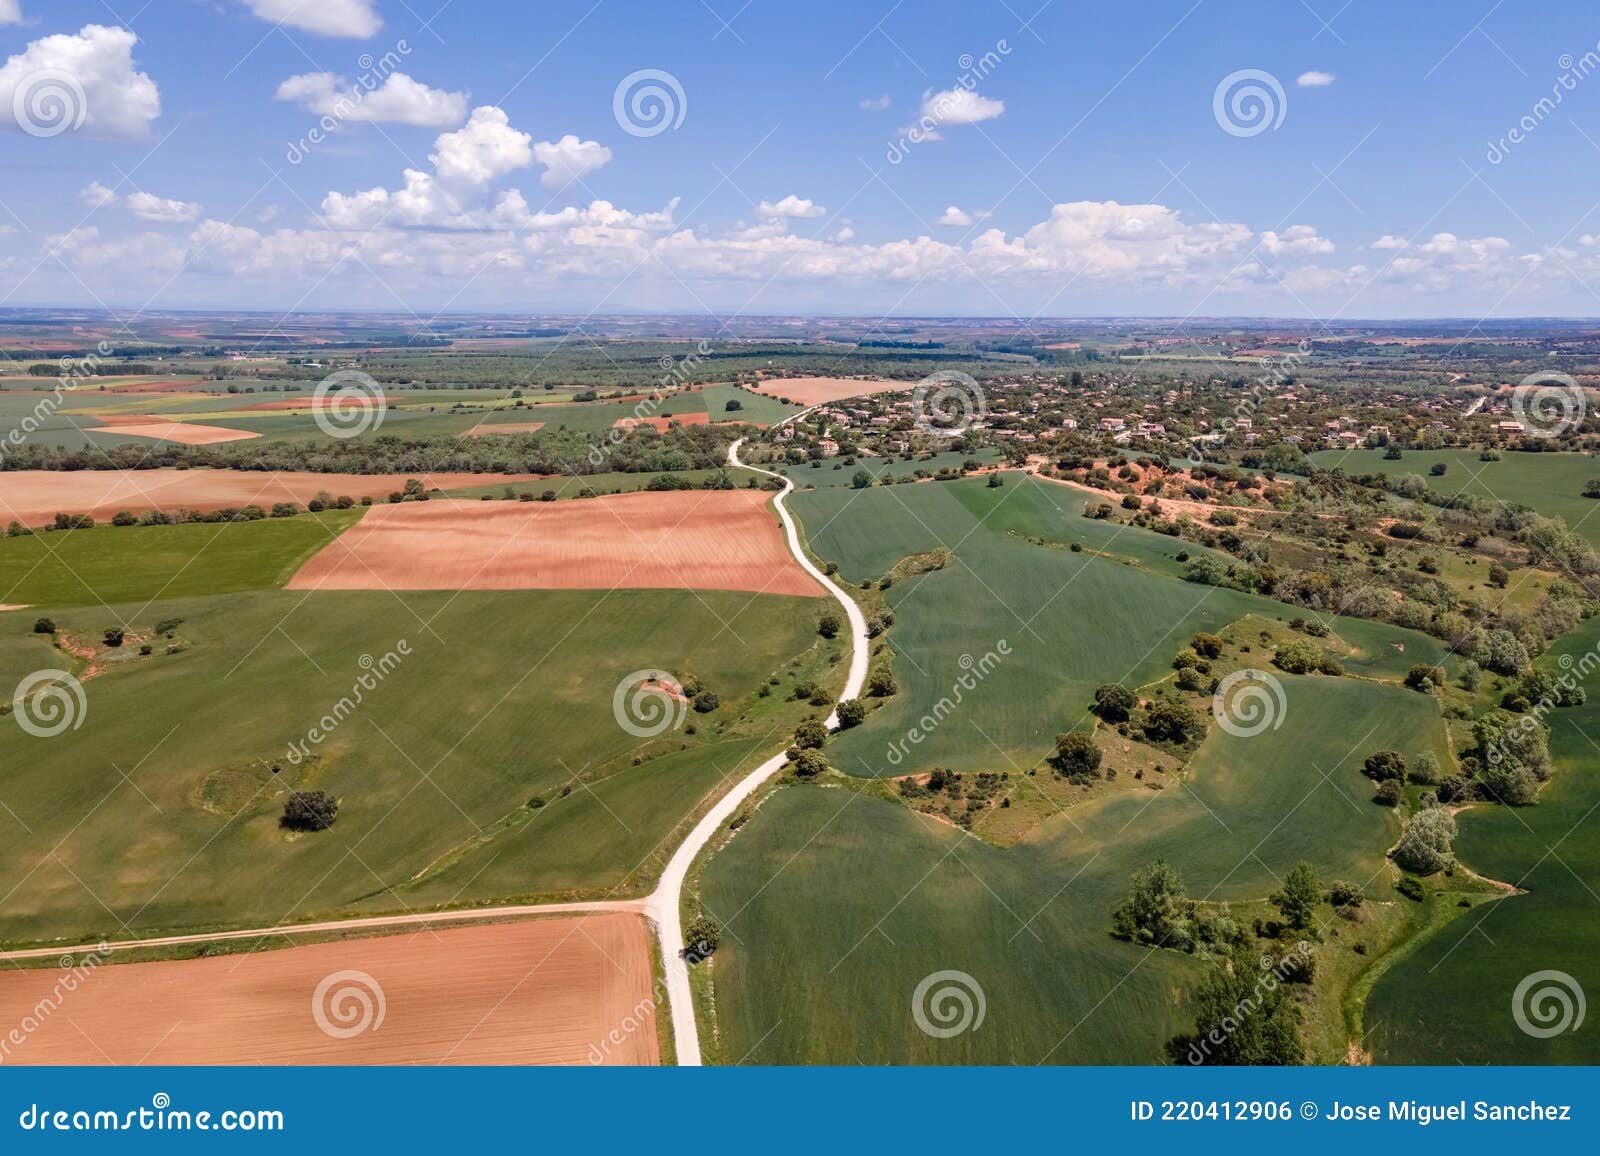 aerial view of a castilian countryside with country houses and plots of land